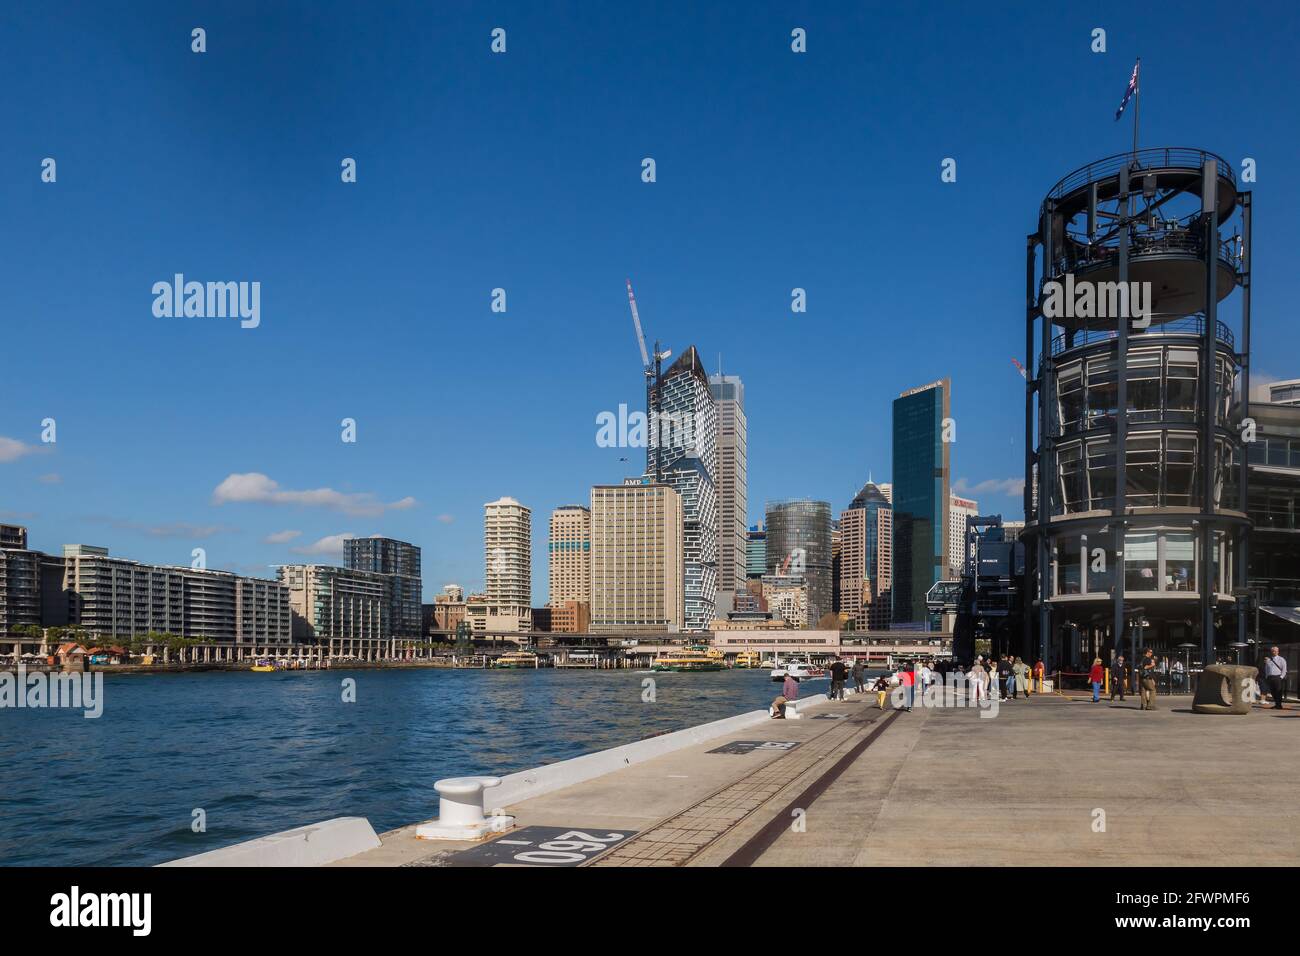 The Overseas Passenger Terminal, The Rocks, Sydney, Australia. Surrounded by skyscrapers. Stock Photo